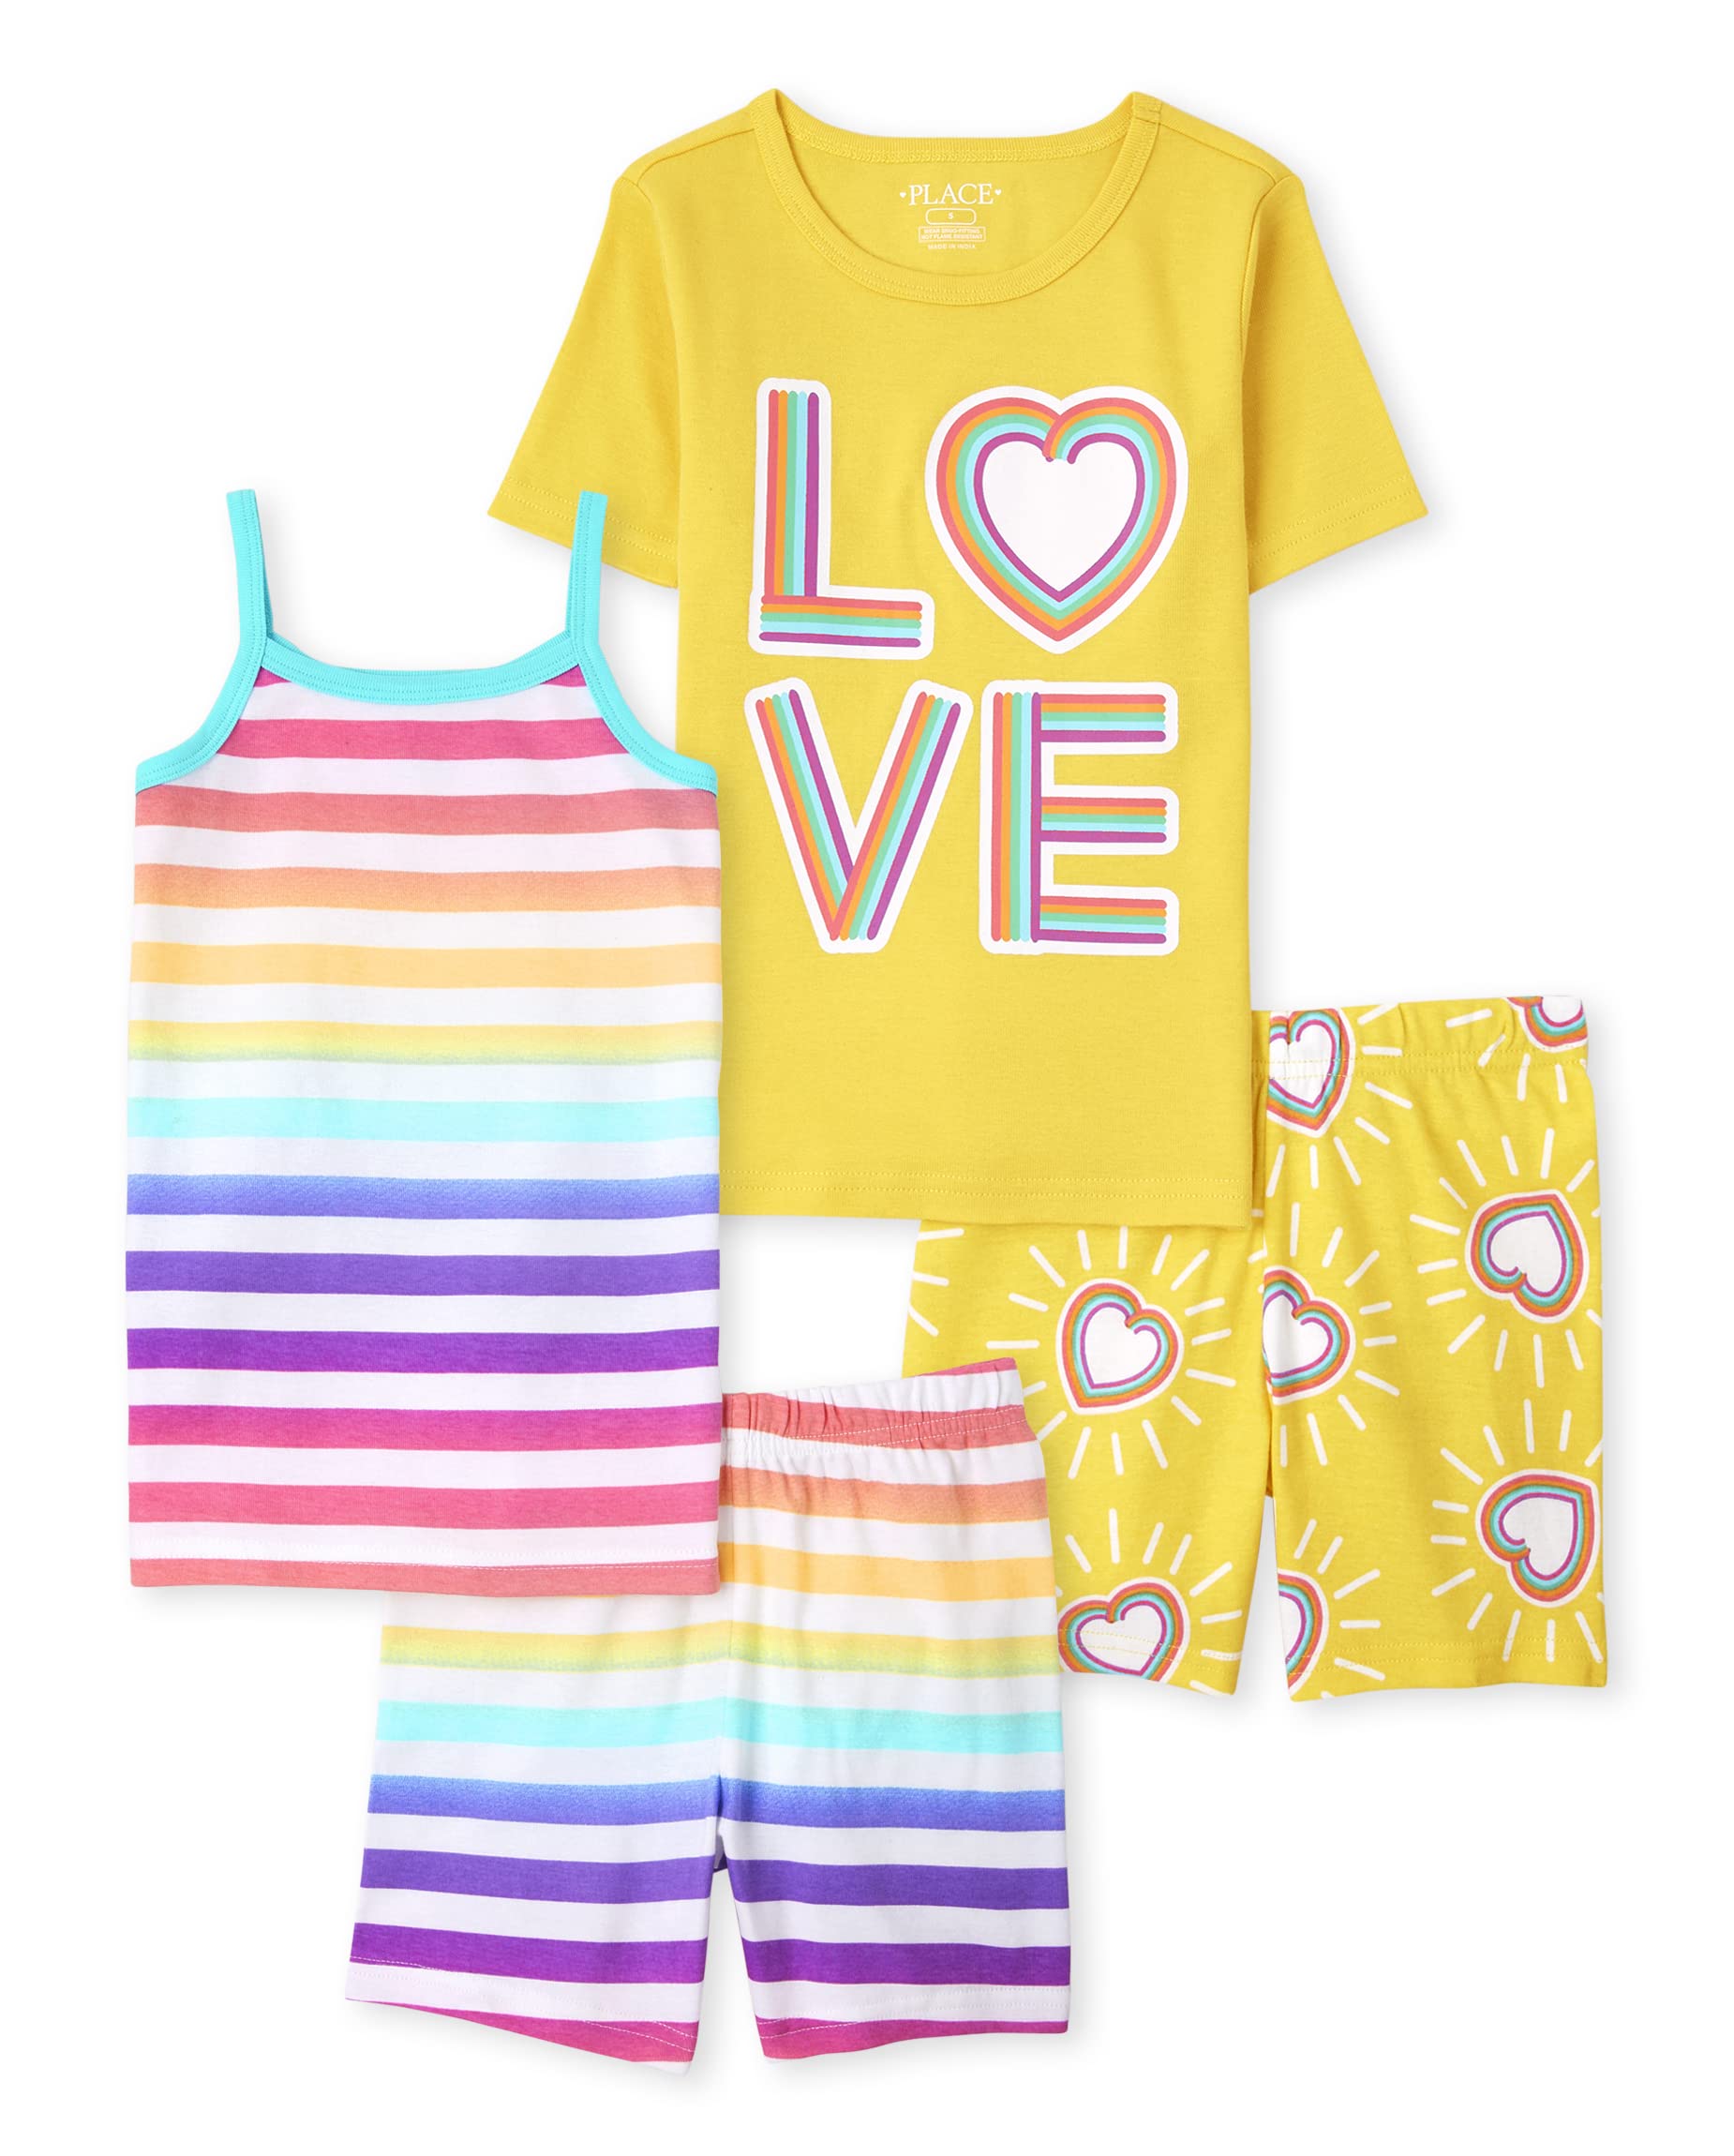 The Children's Place Girls' Kids-PJ Sleeve Top and Shorts Pajama Set